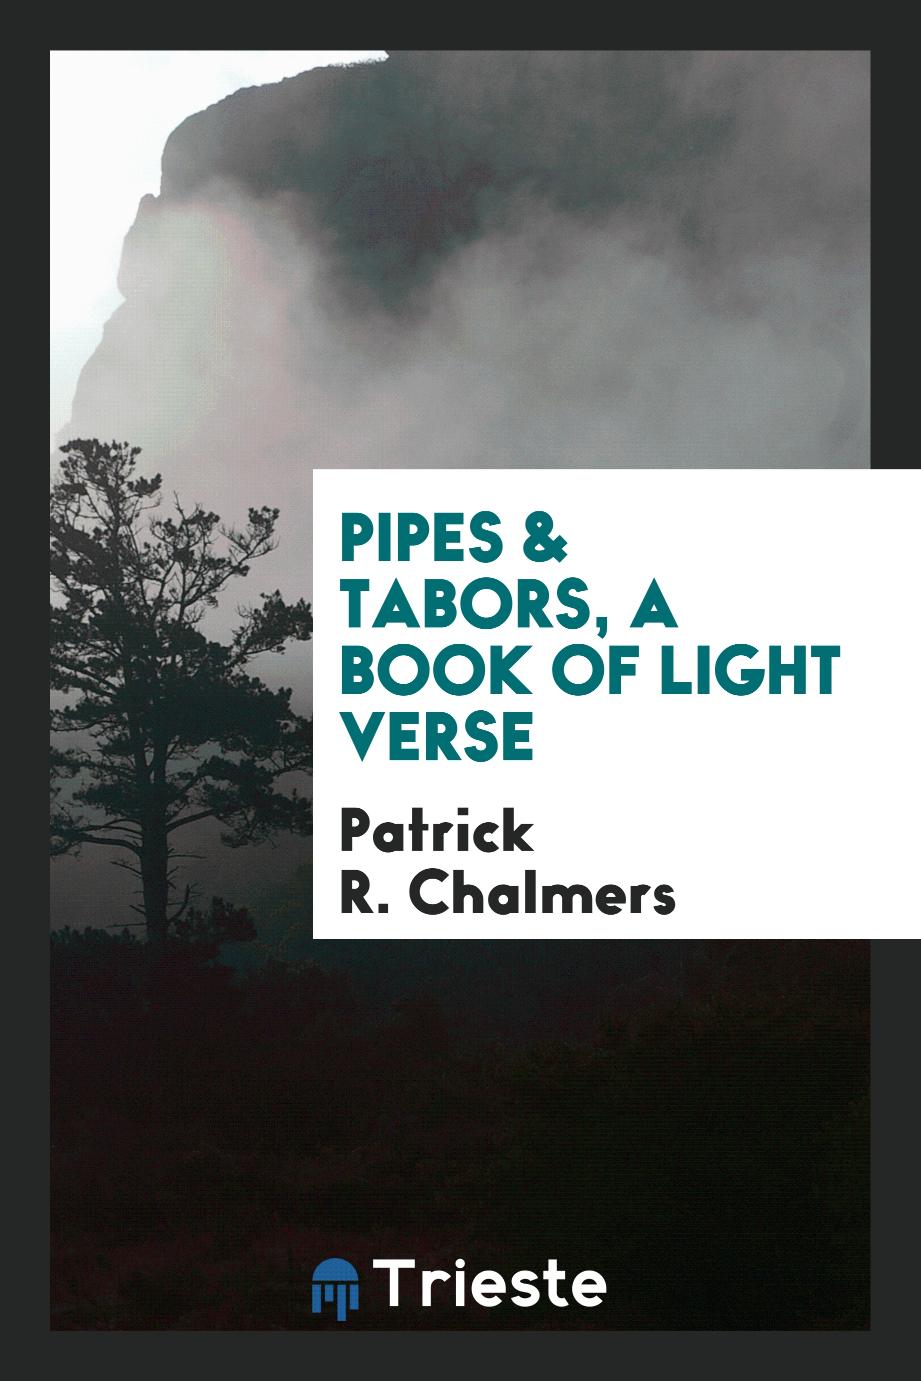 Pipes & tabors, a book of light verse